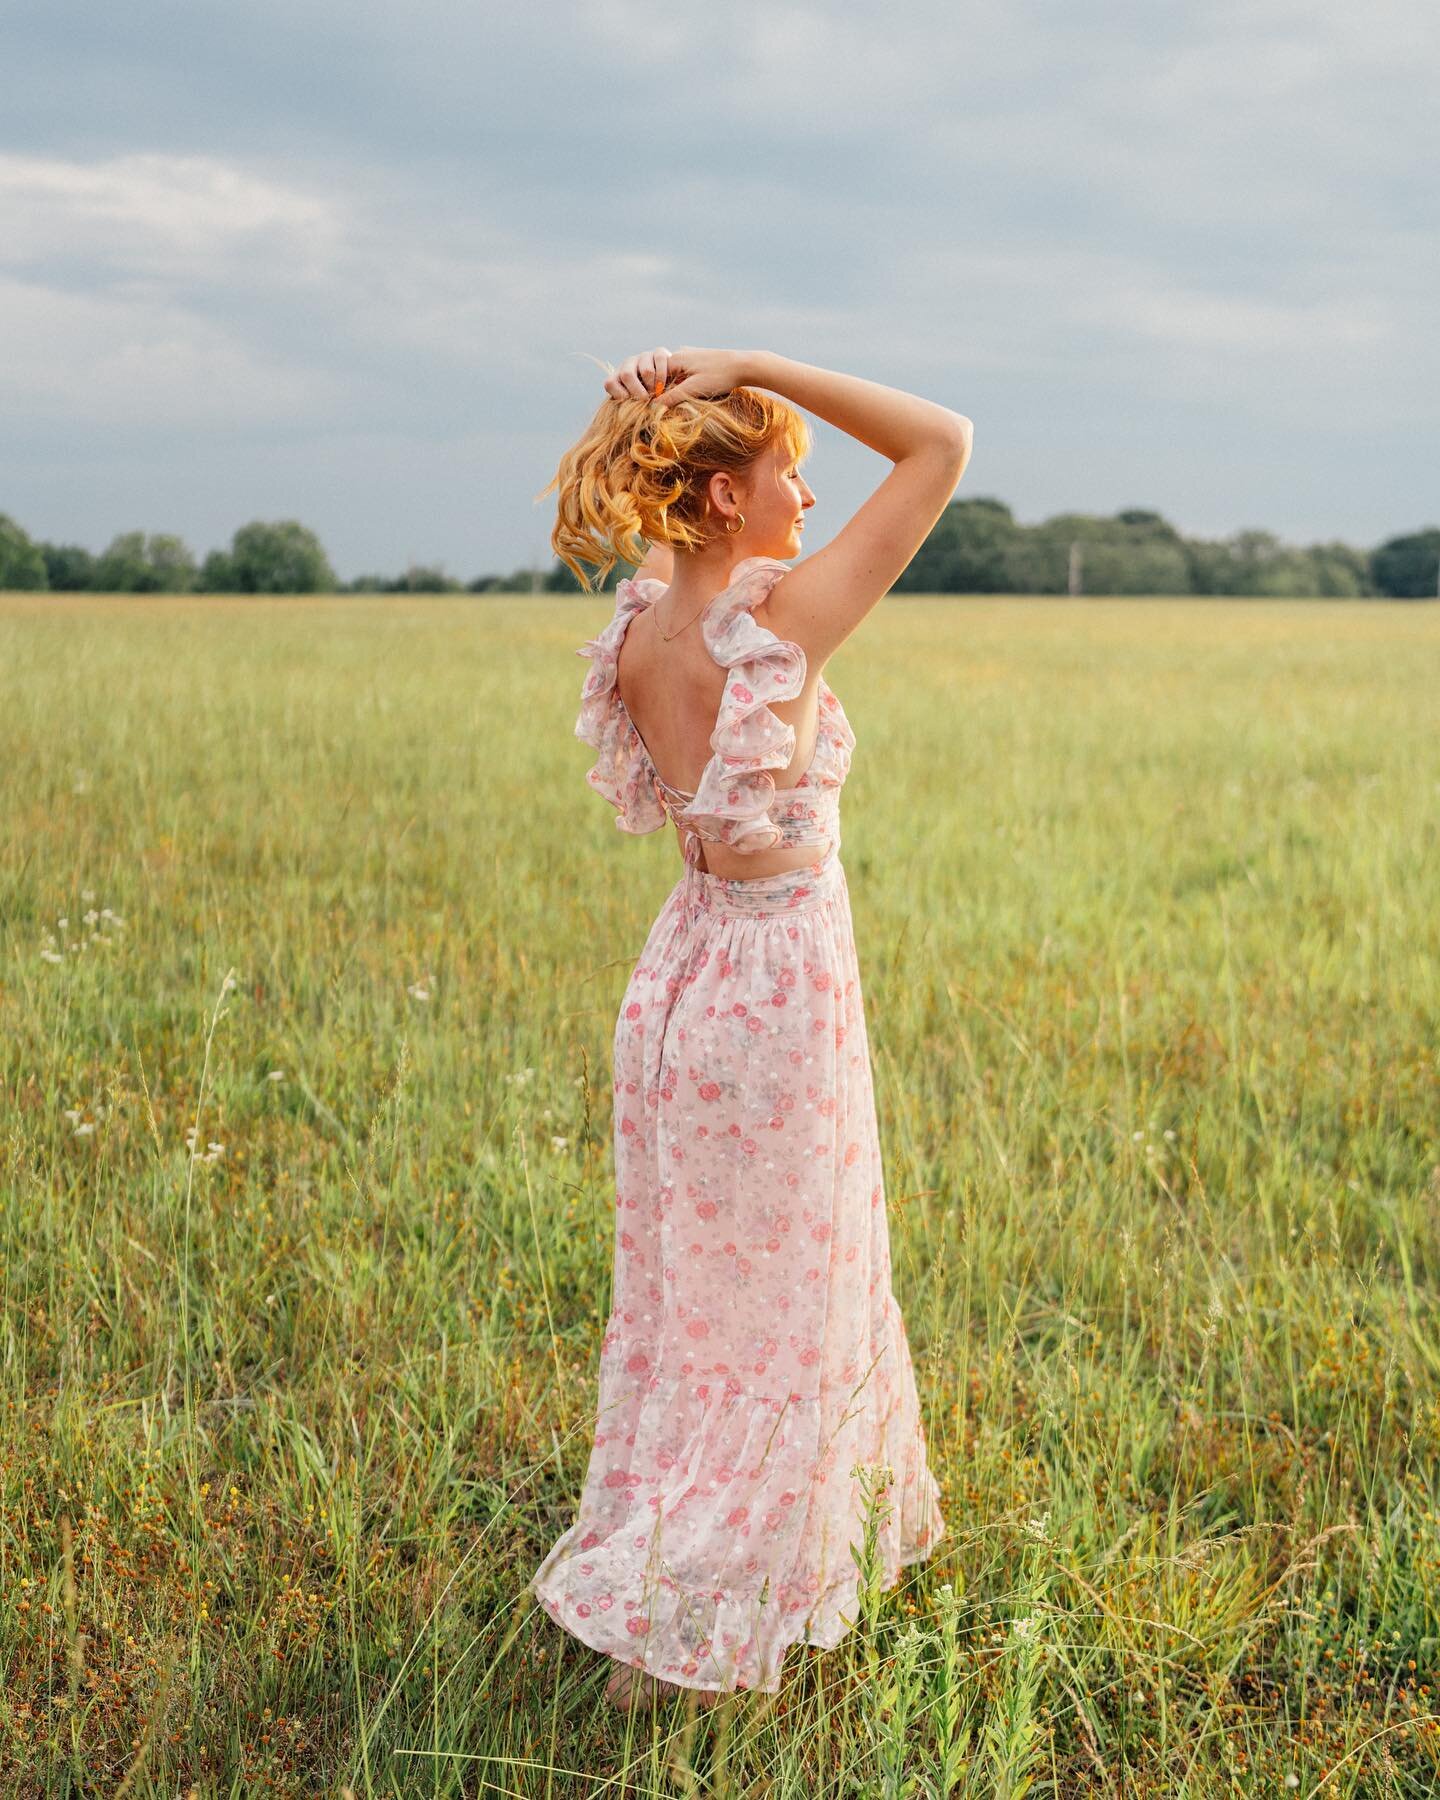 Okay so&hellip; these are probably my favorite portraits I&rsquo;ve taken. We found this field right in Simpsonville, and went for the indie girl vibe look that Holland kills. Super fun shoot, and we even got pizza afterward🤩

#weddingphotographer #